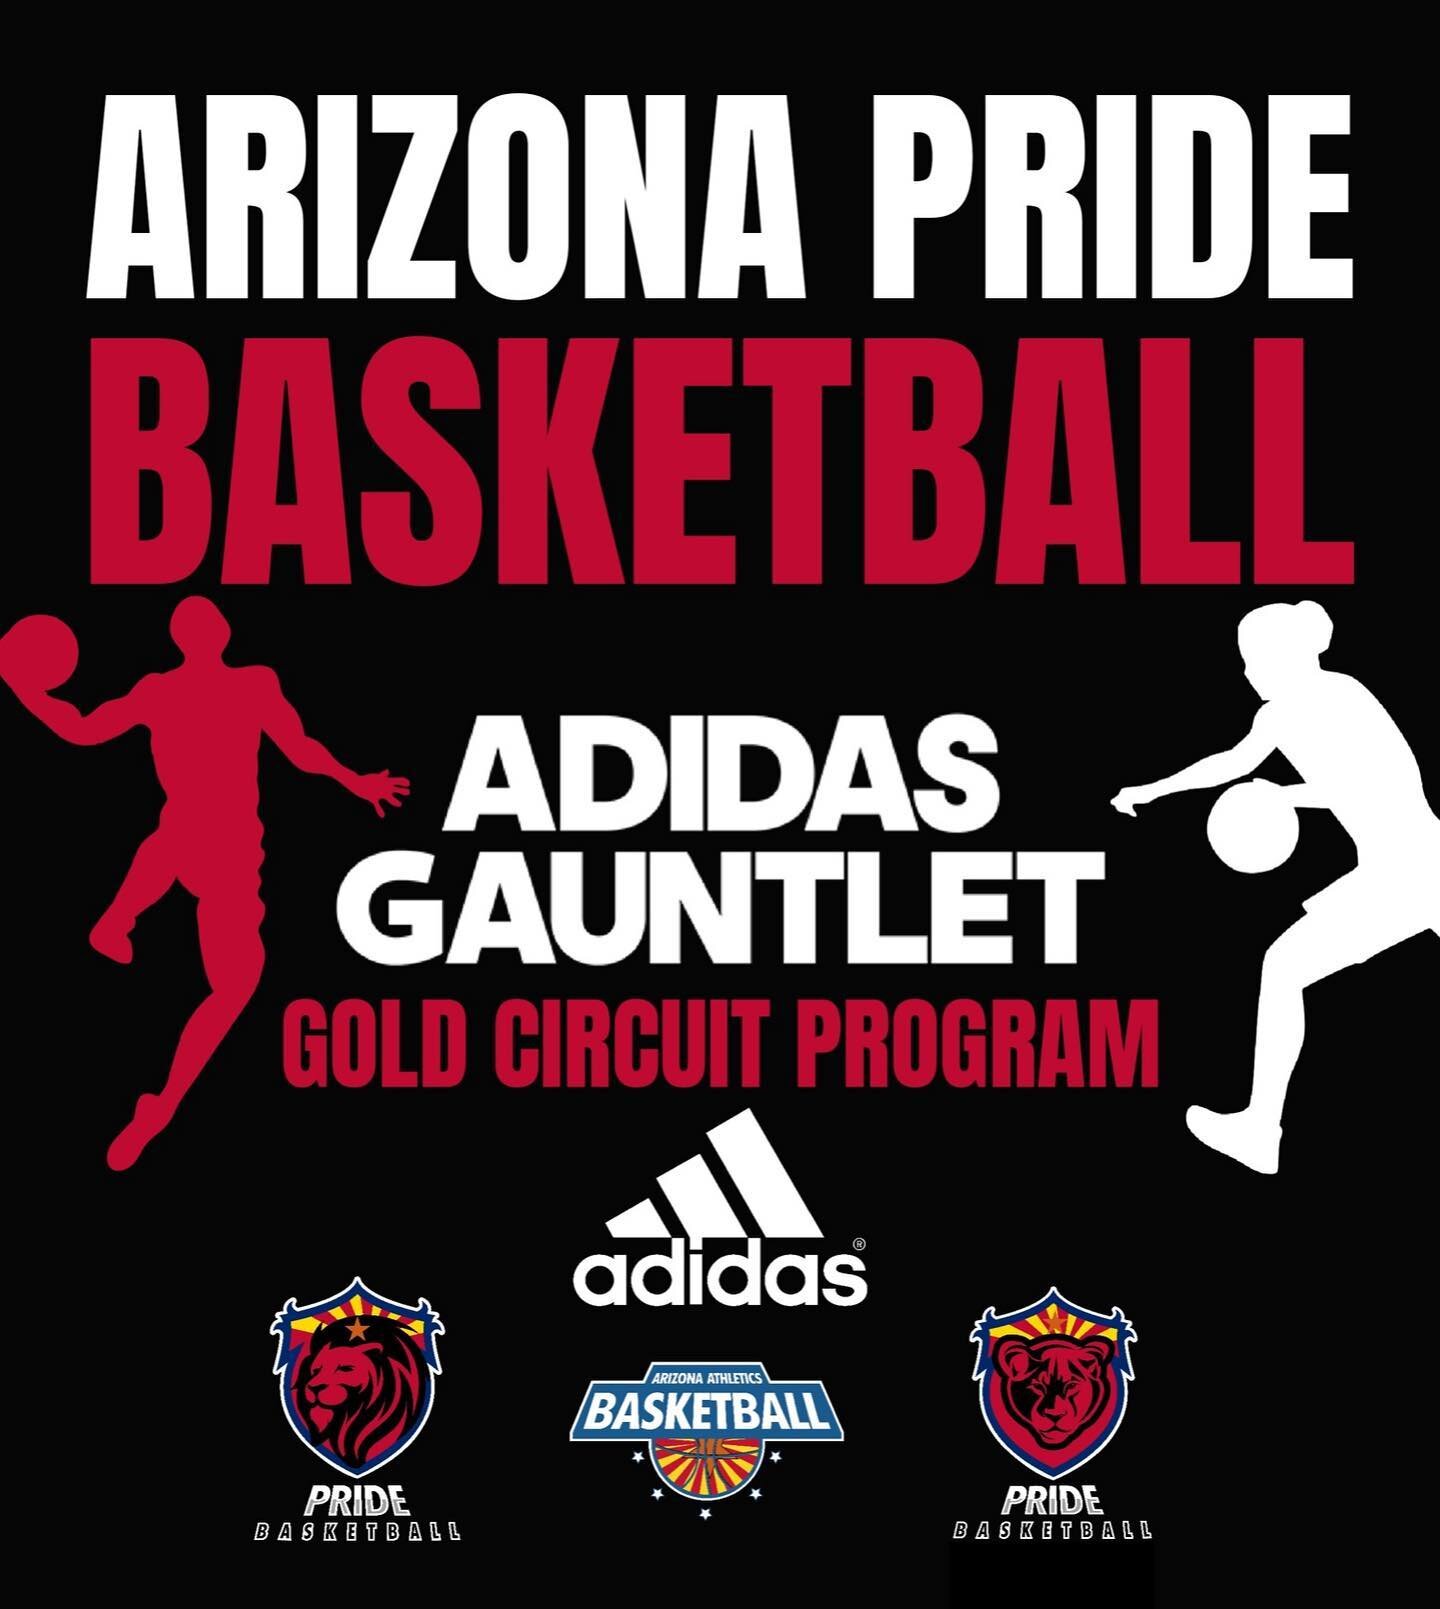 Looking for dedicated players who want to compete at the next level. 1:1 Open workouts start this week. Official tryouts begin after the HS season. Contact us with any questions. 

@adidasbasketball @arizonapridebasketball @adidaswomen